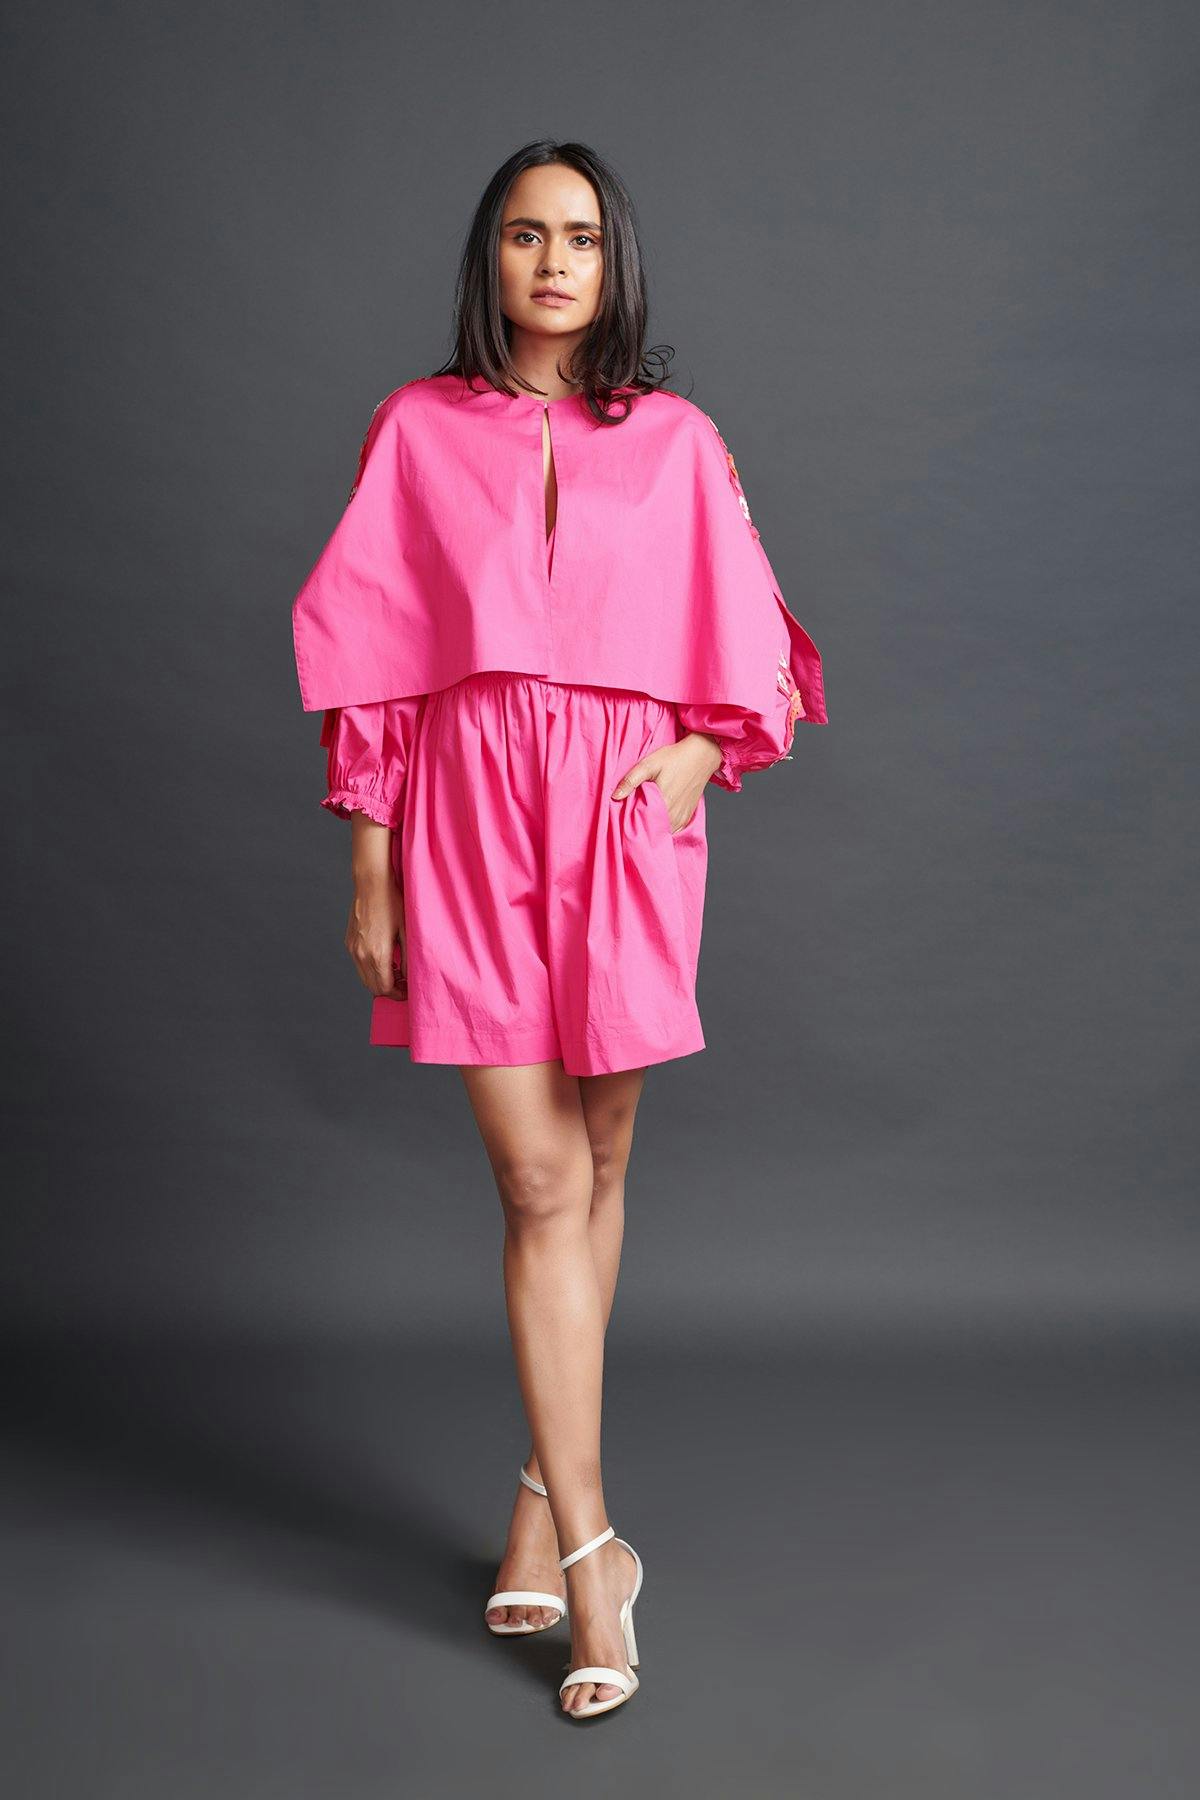 pink playsuit with embroidered, a product by Deepika Arora